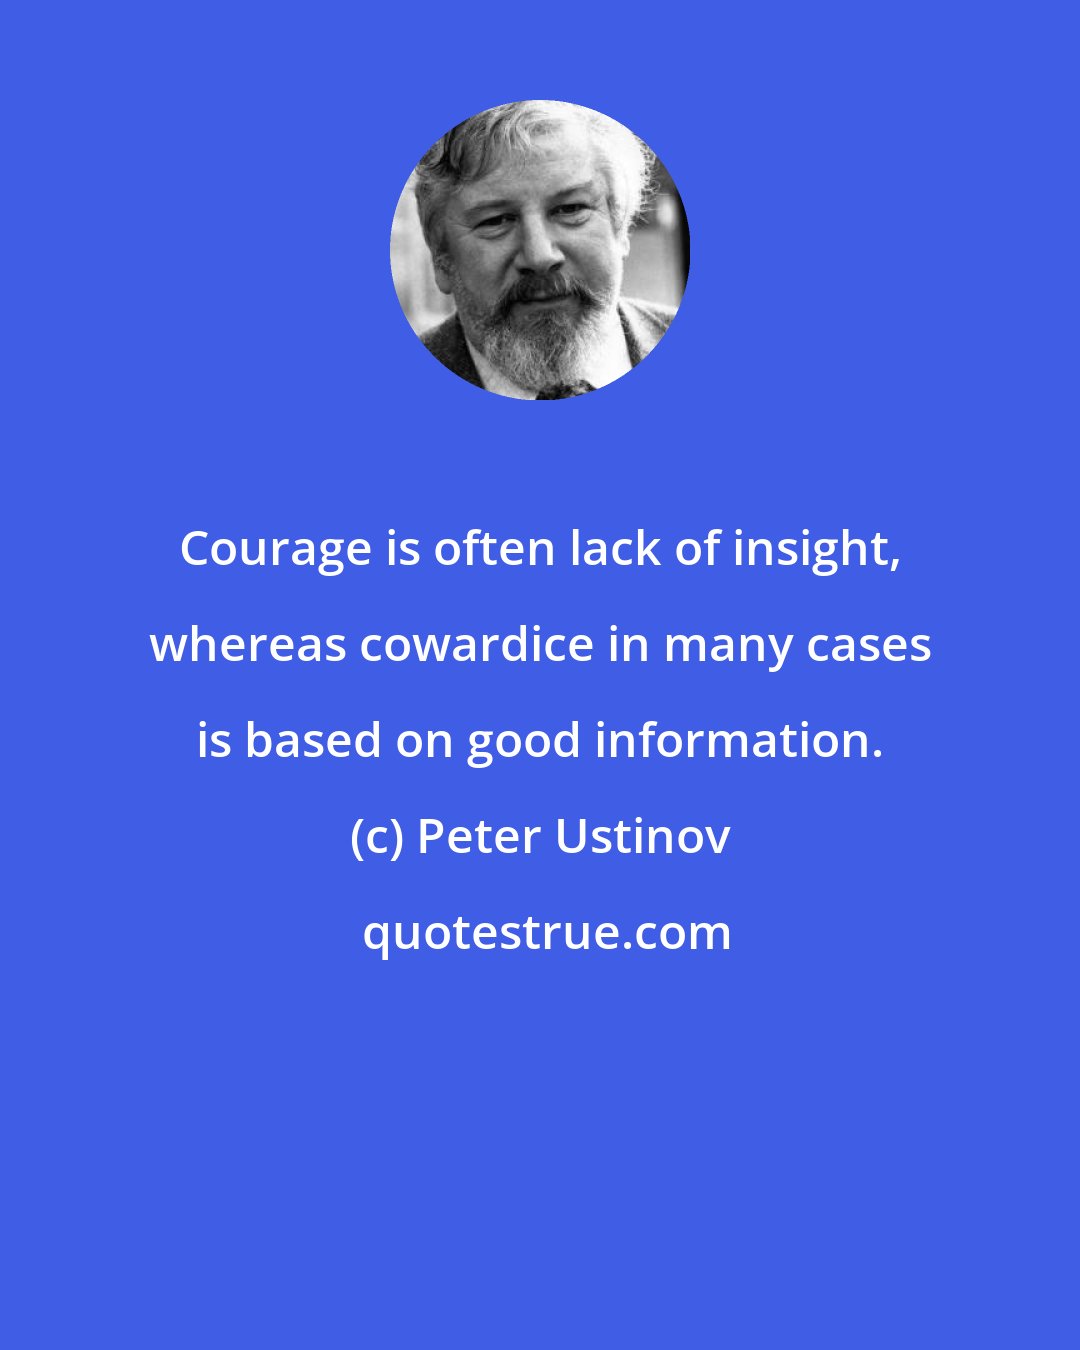 Peter Ustinov: Courage is often lack of insight, whereas cowardice in many cases is based on good information.